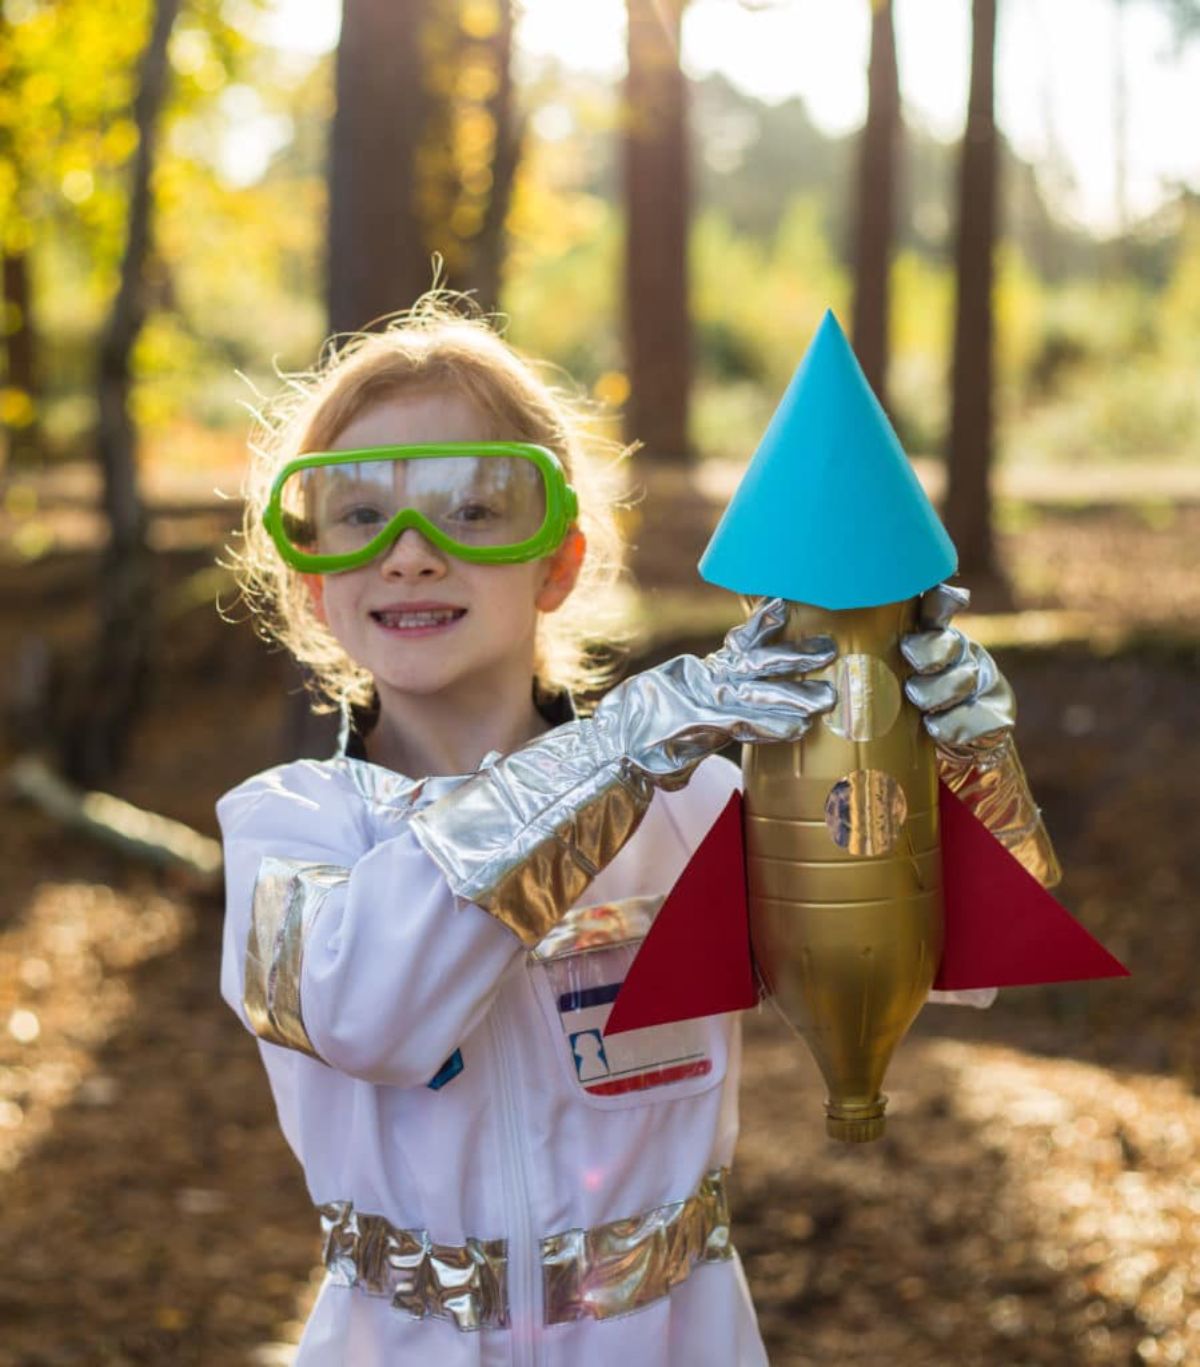 A girl dressed as an astronaut wearing goggles and holds uo a rocket made of a water bottle and cardboard